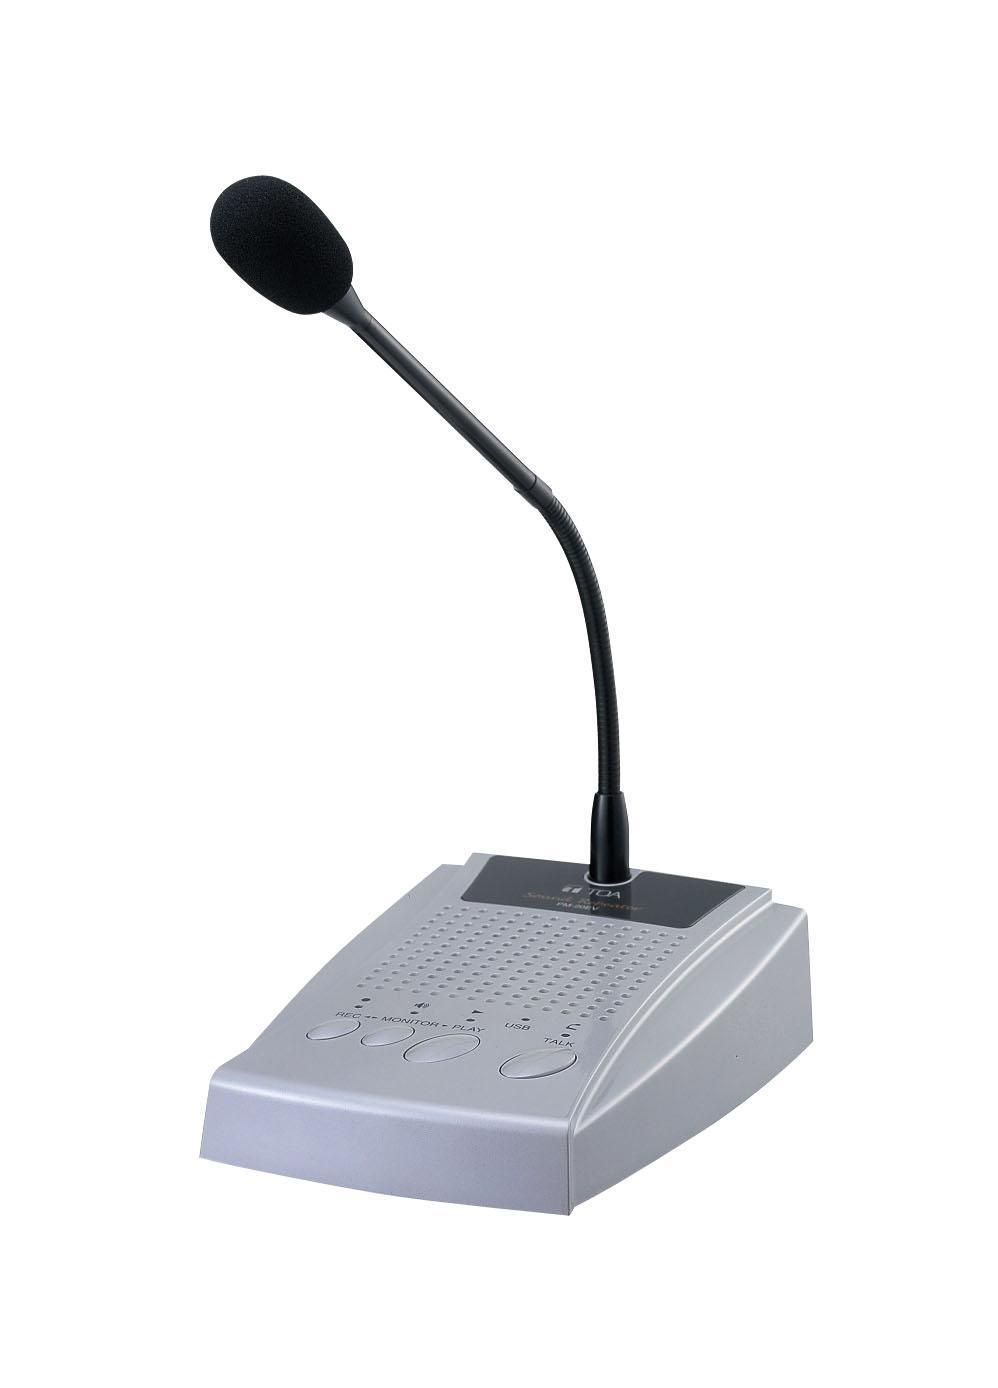 Foto TOA PM-20EV Desk Microphone Notices With Message